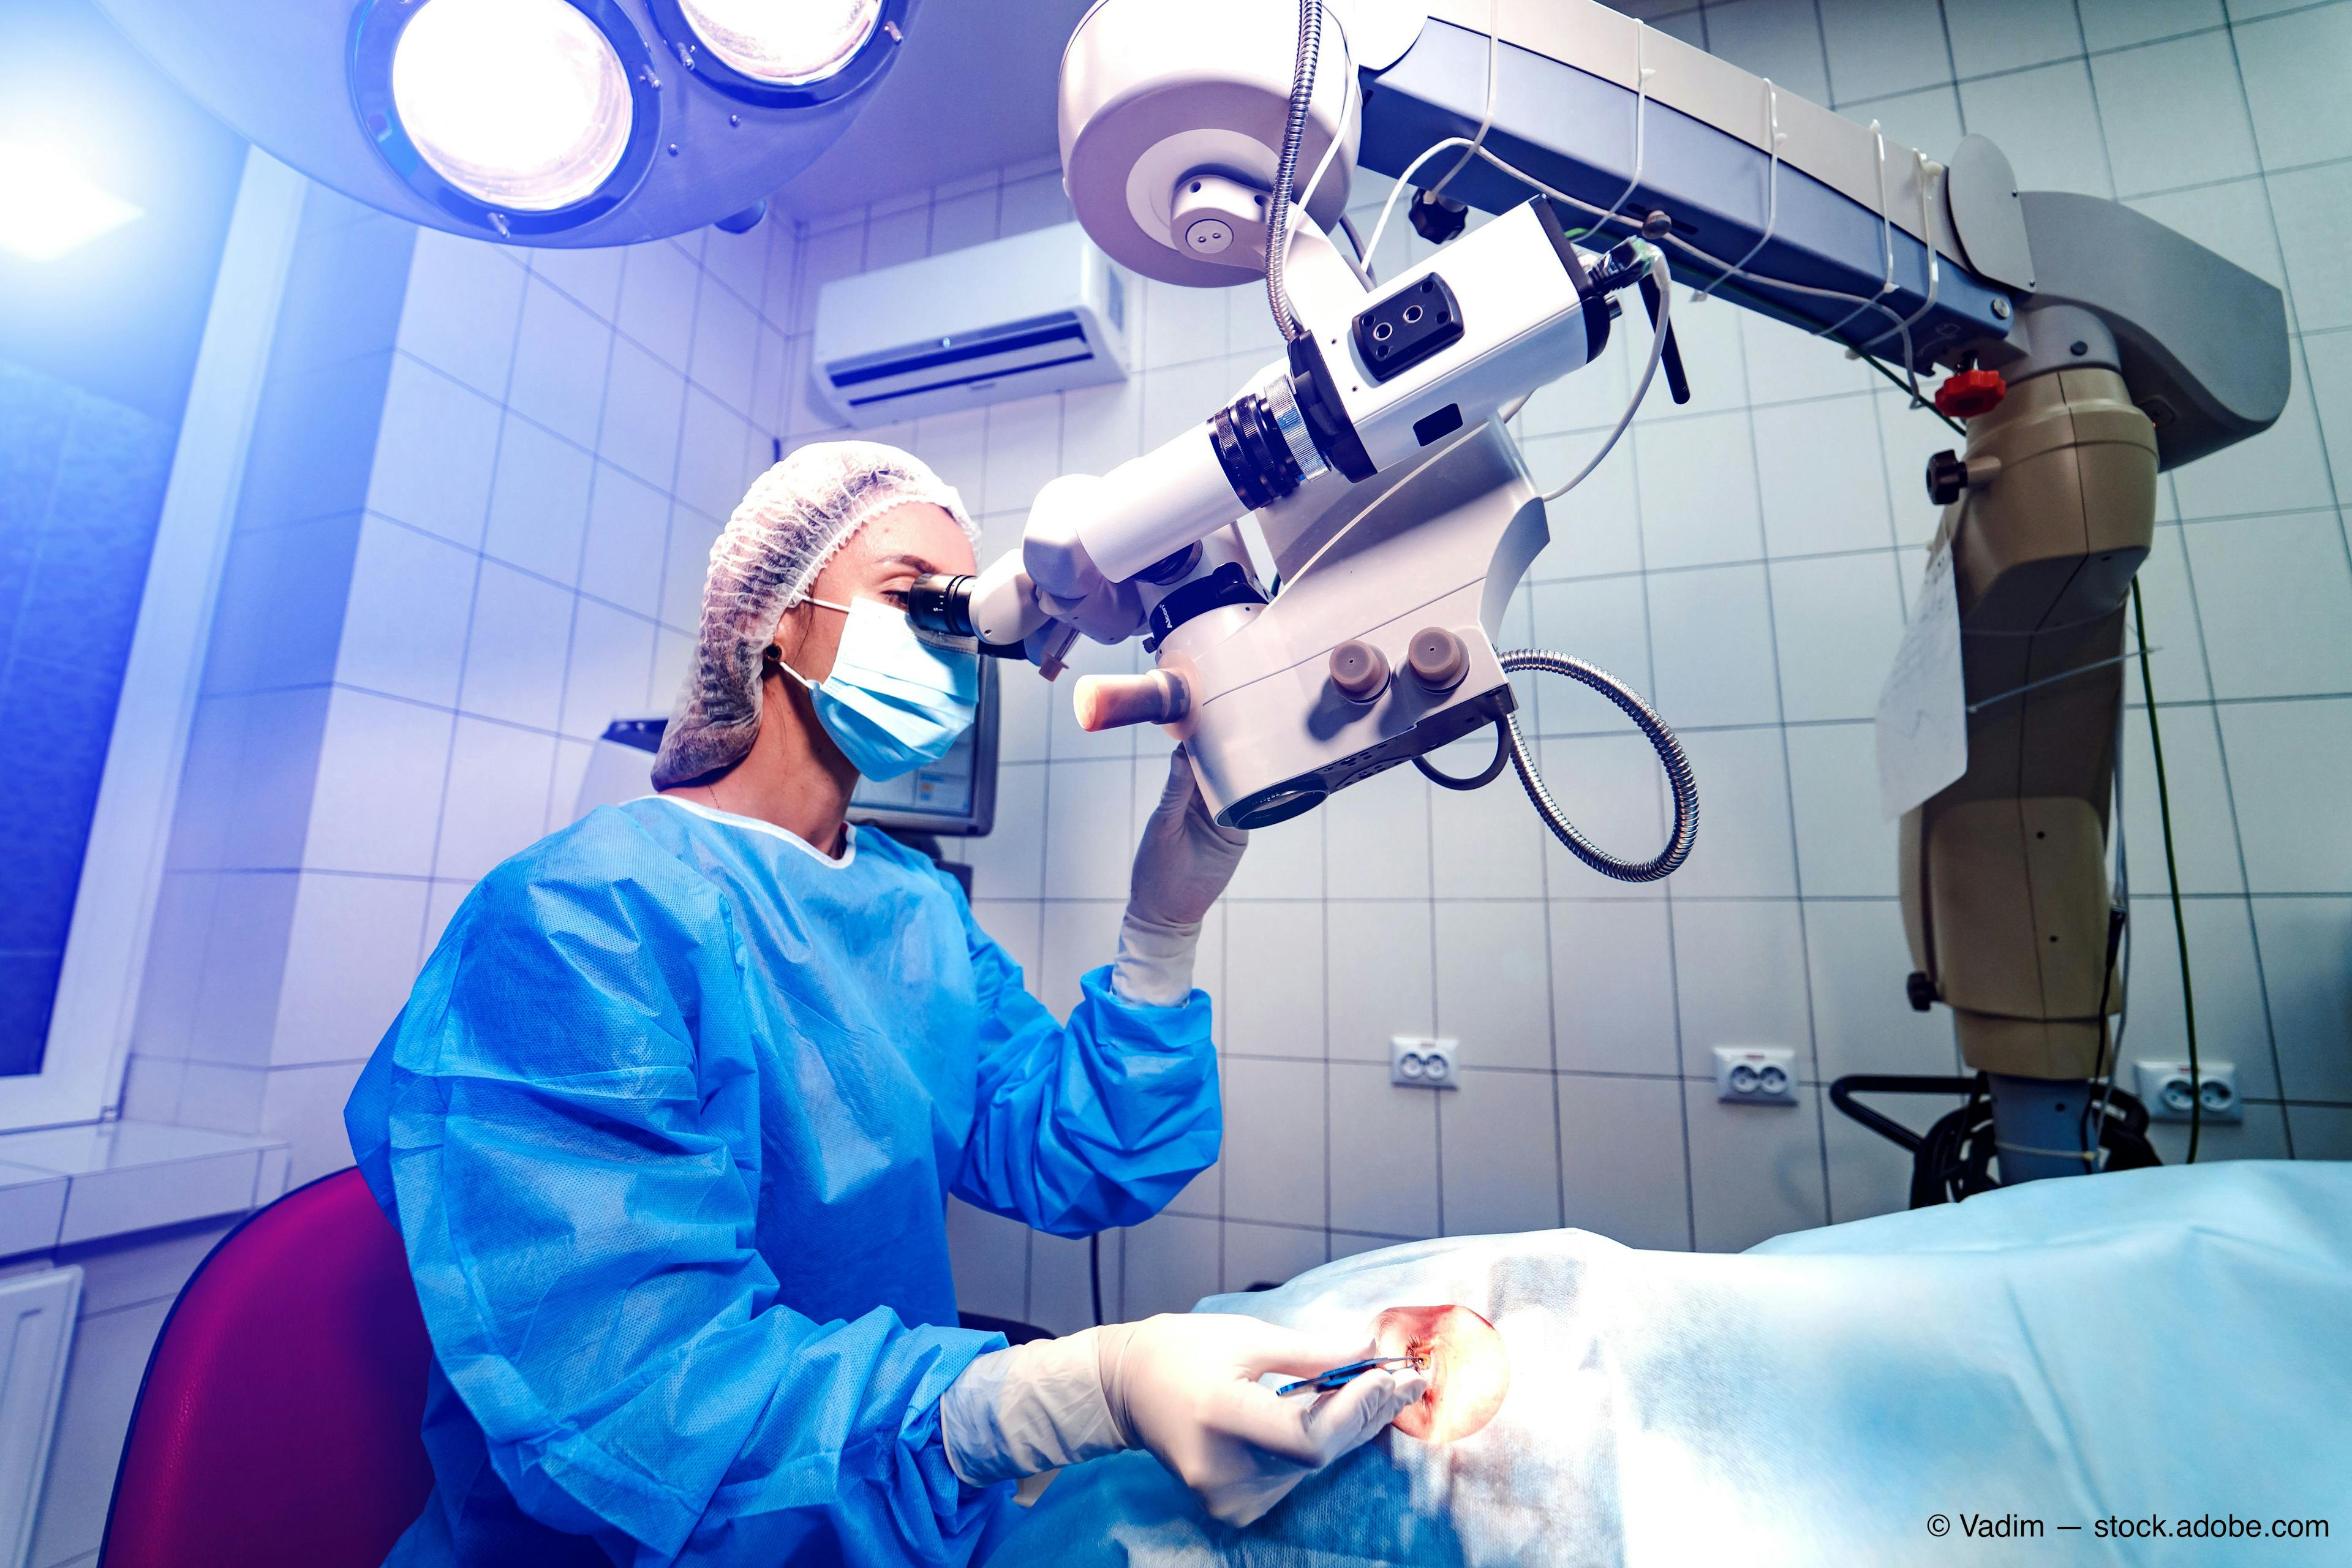 Study: Visual decreases within a day after uneventful phacoemulsification surgery